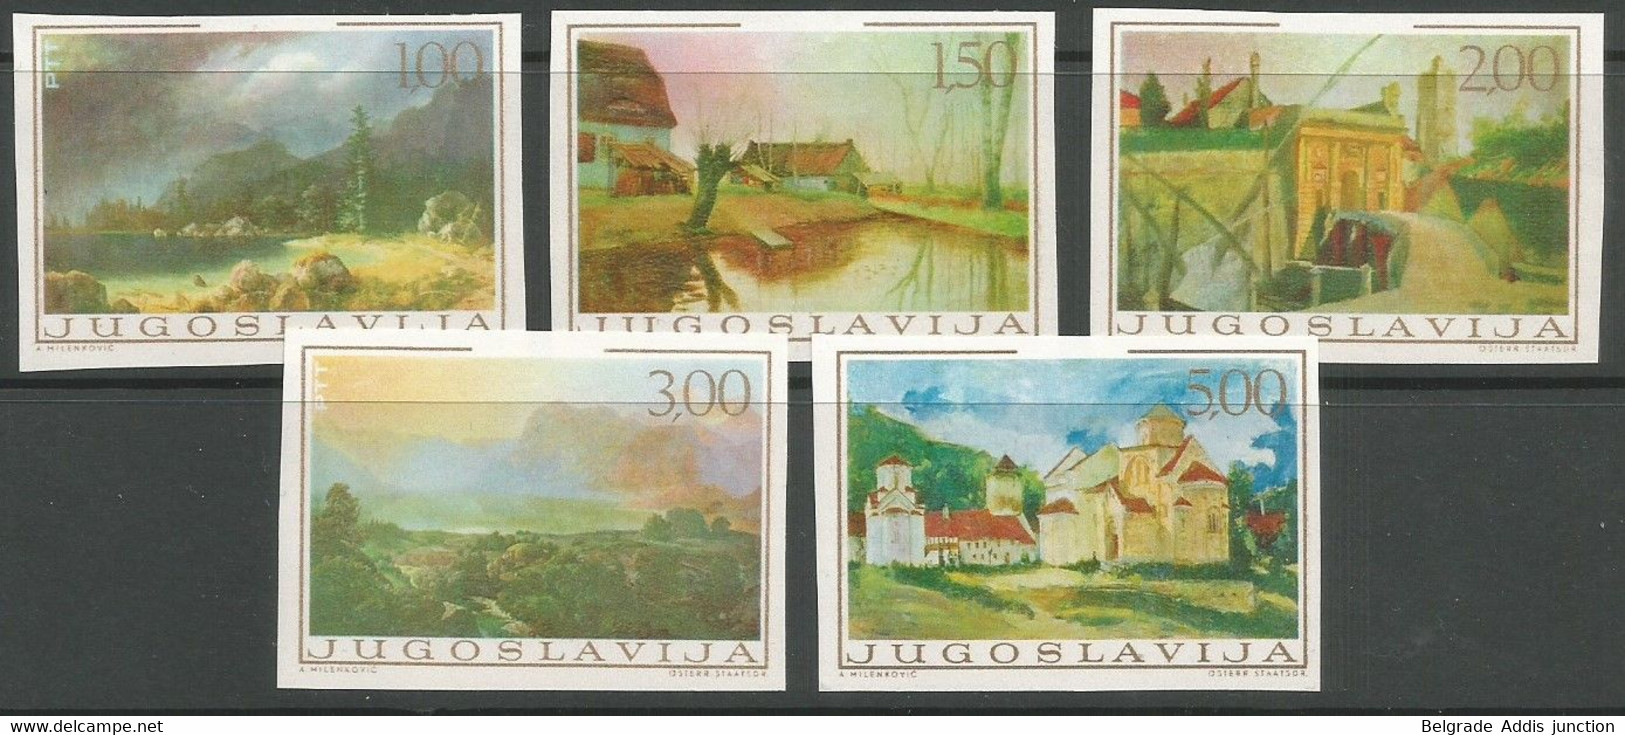 Yugoslavia Mi.1298/302UFII Set Imperforated, Without Engraving MNH / ** 1968 Painting, Great Rarity! - Imperforates, Proofs & Errors